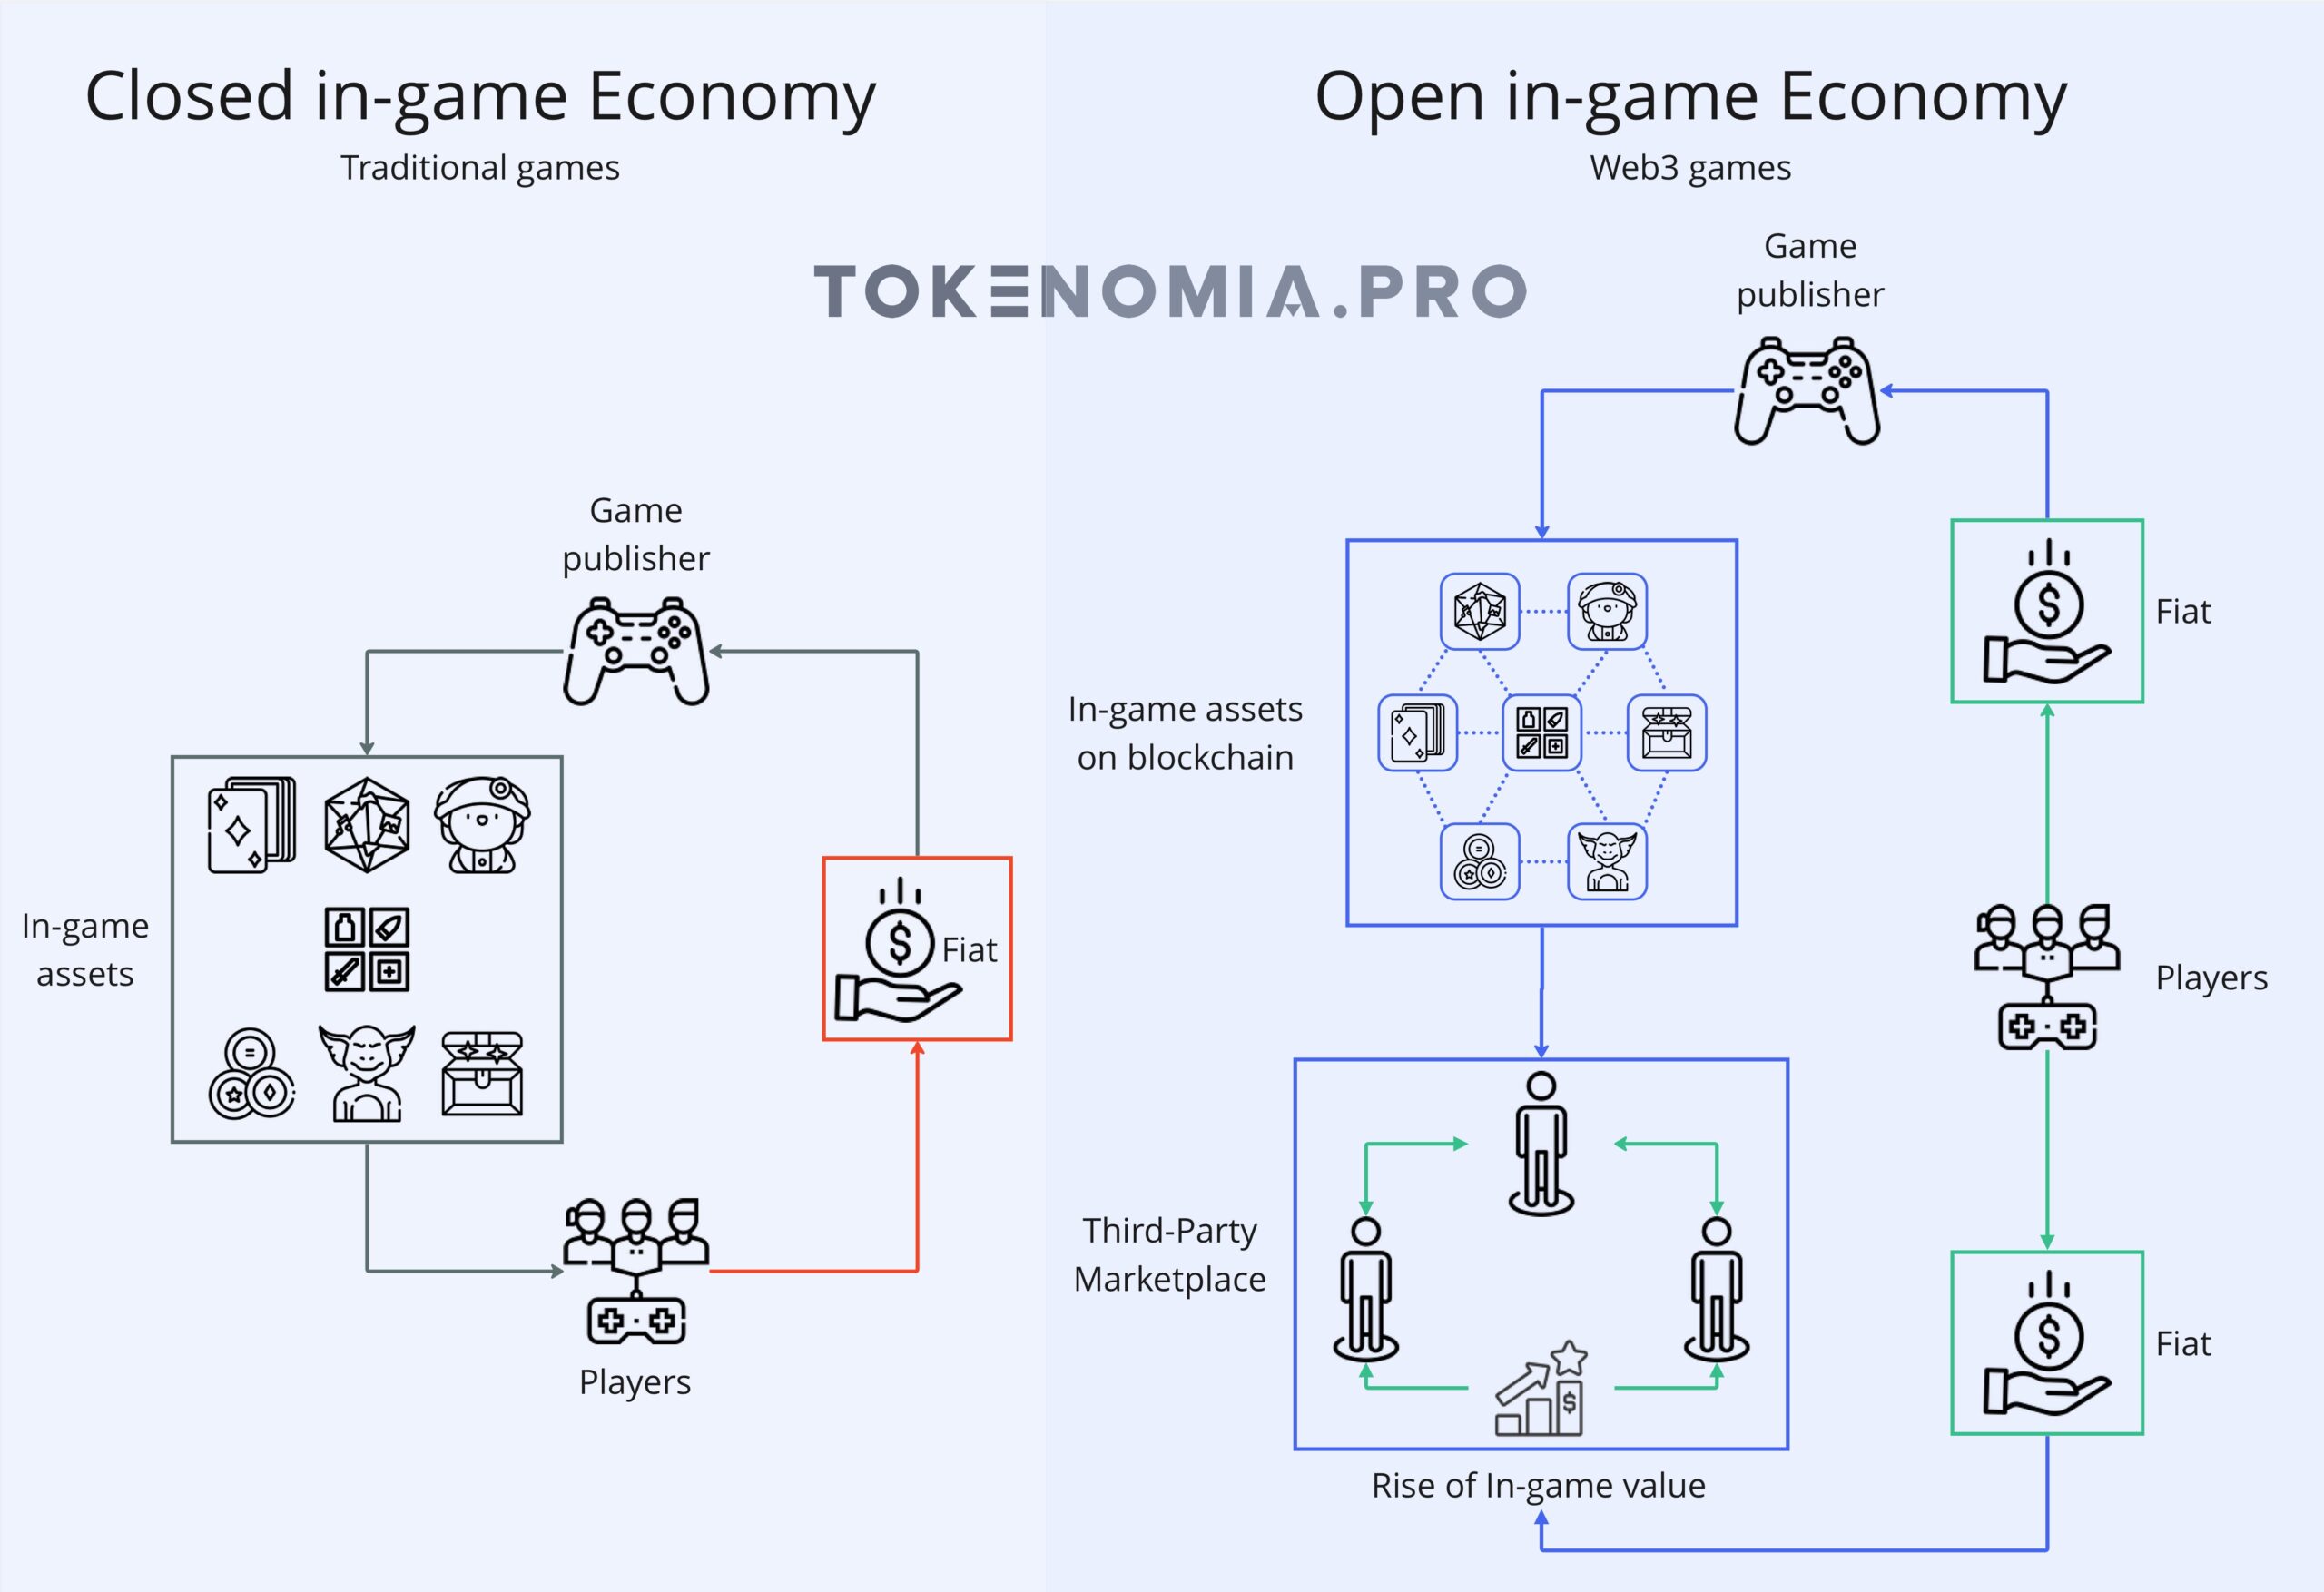 Comparison of open in-game economy and closed in-game economy